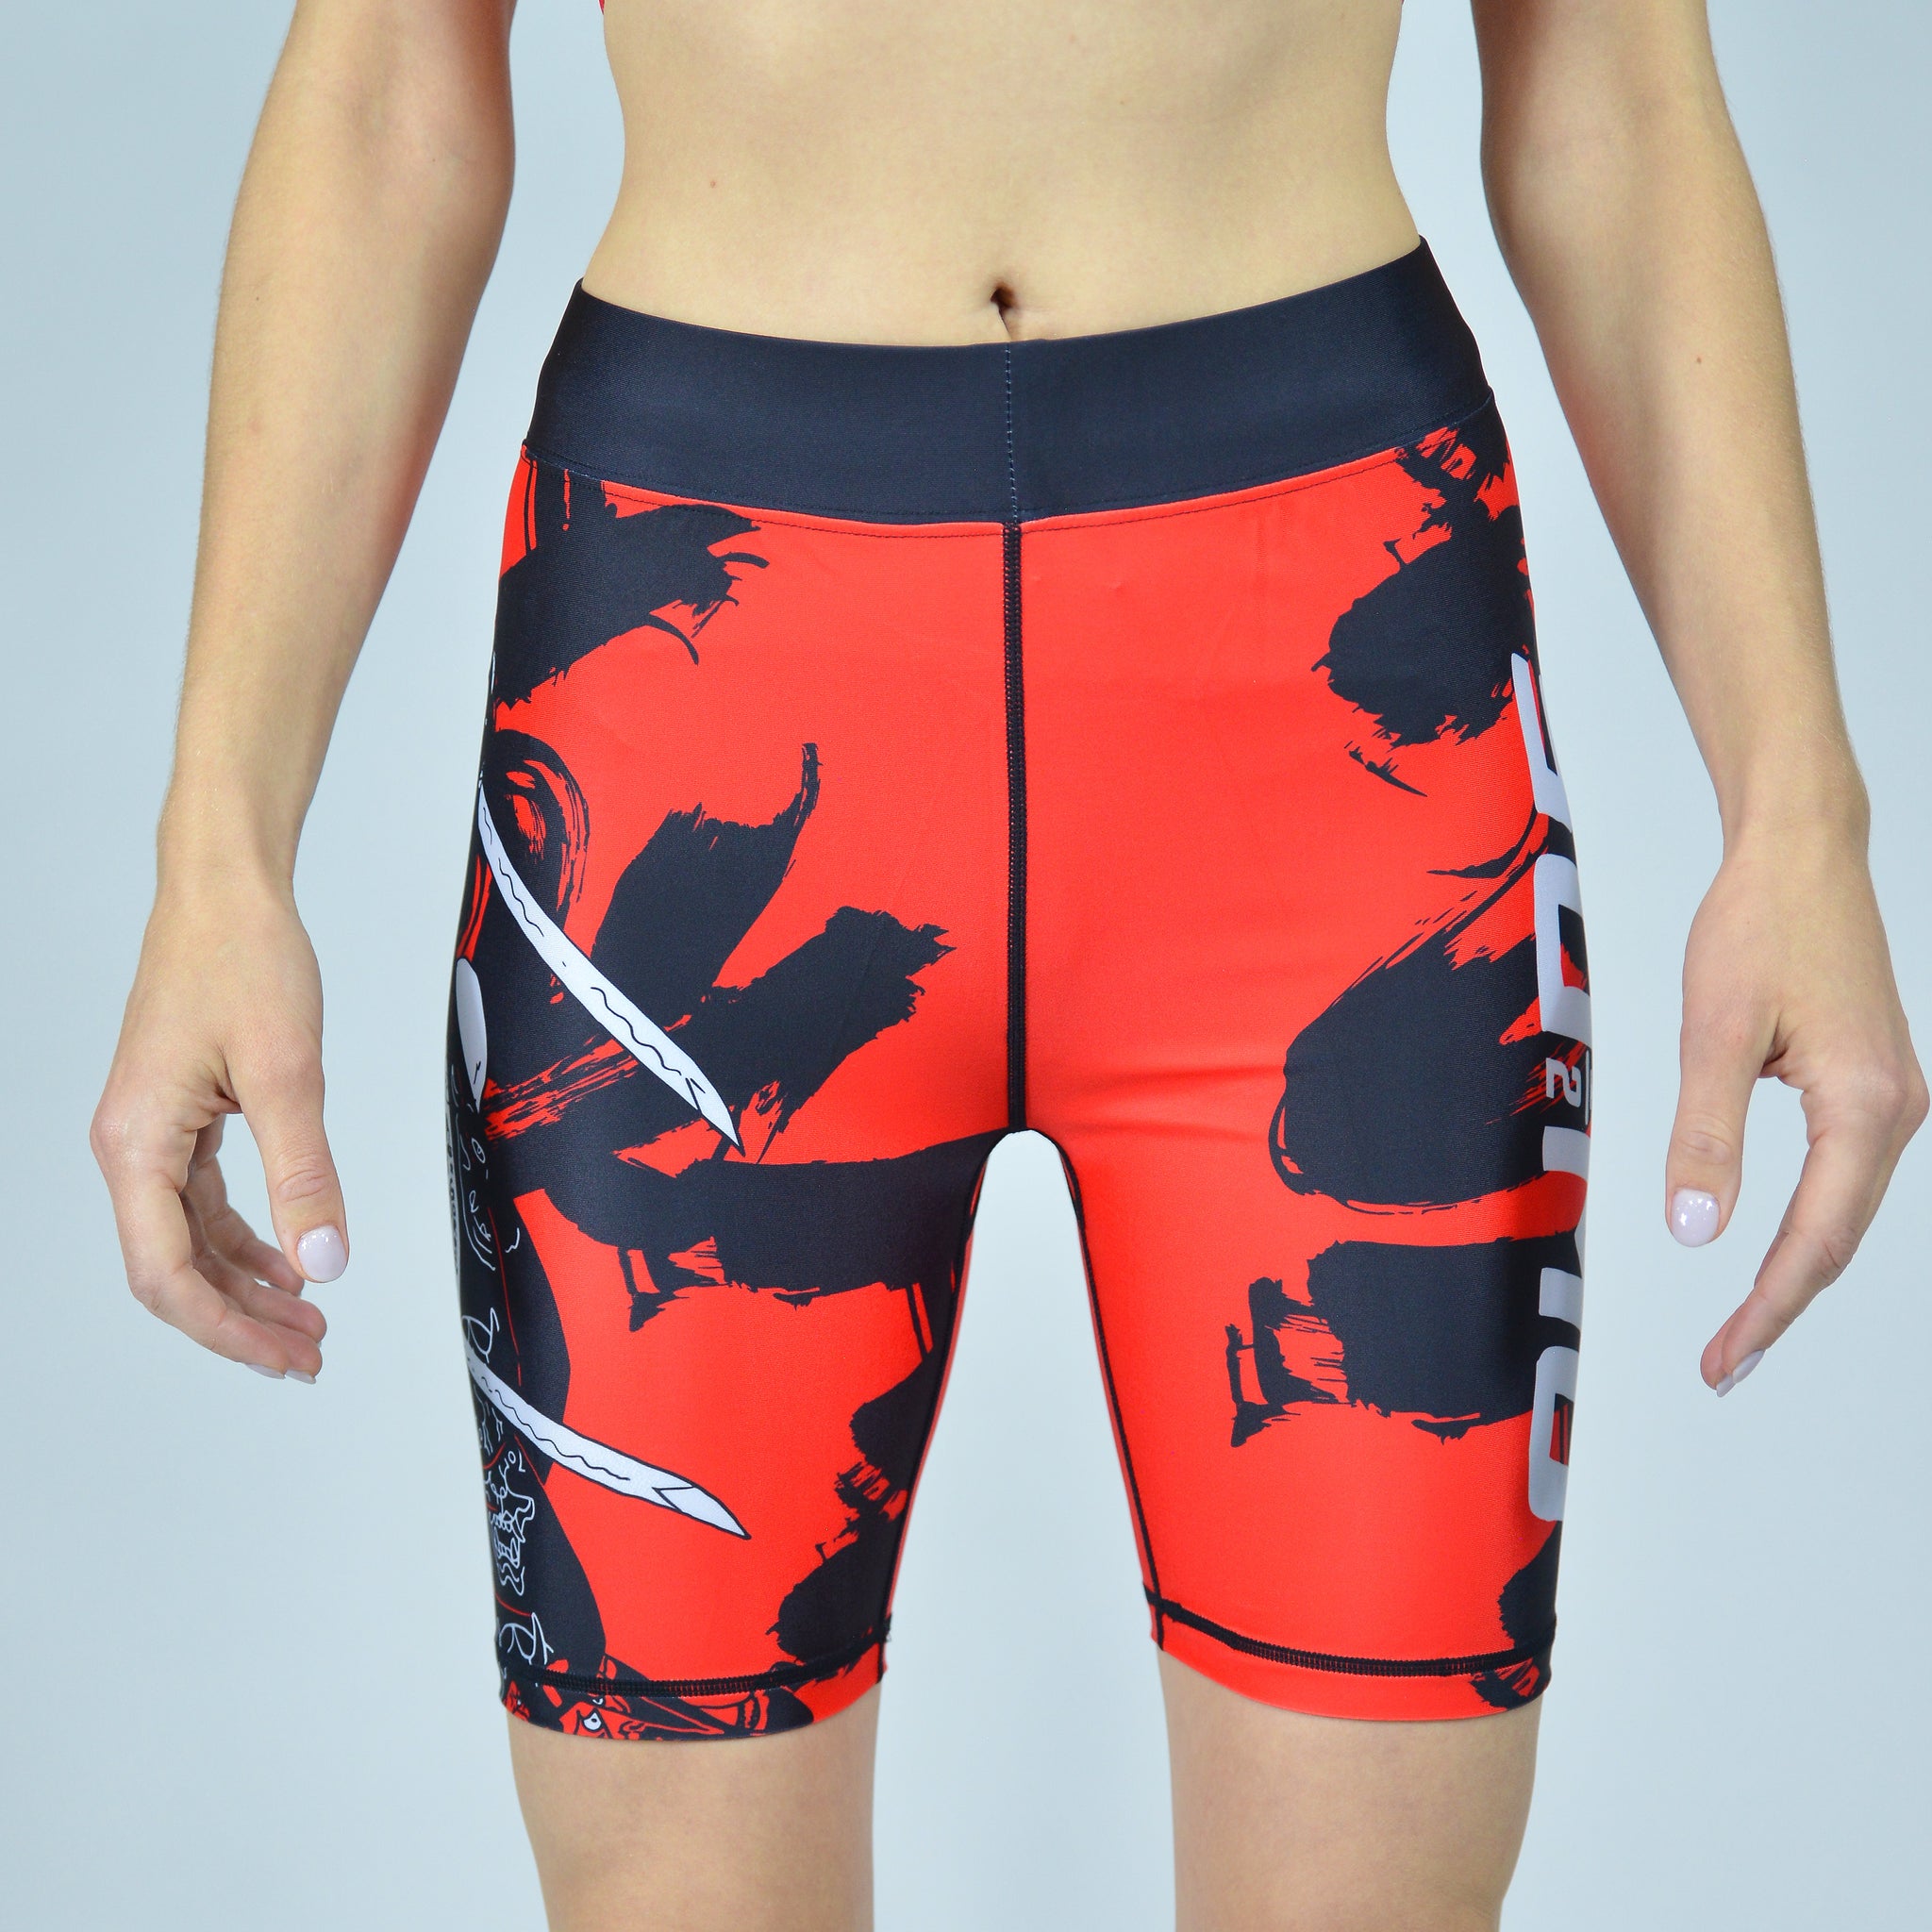 Onna Red Compression Shorts for Women